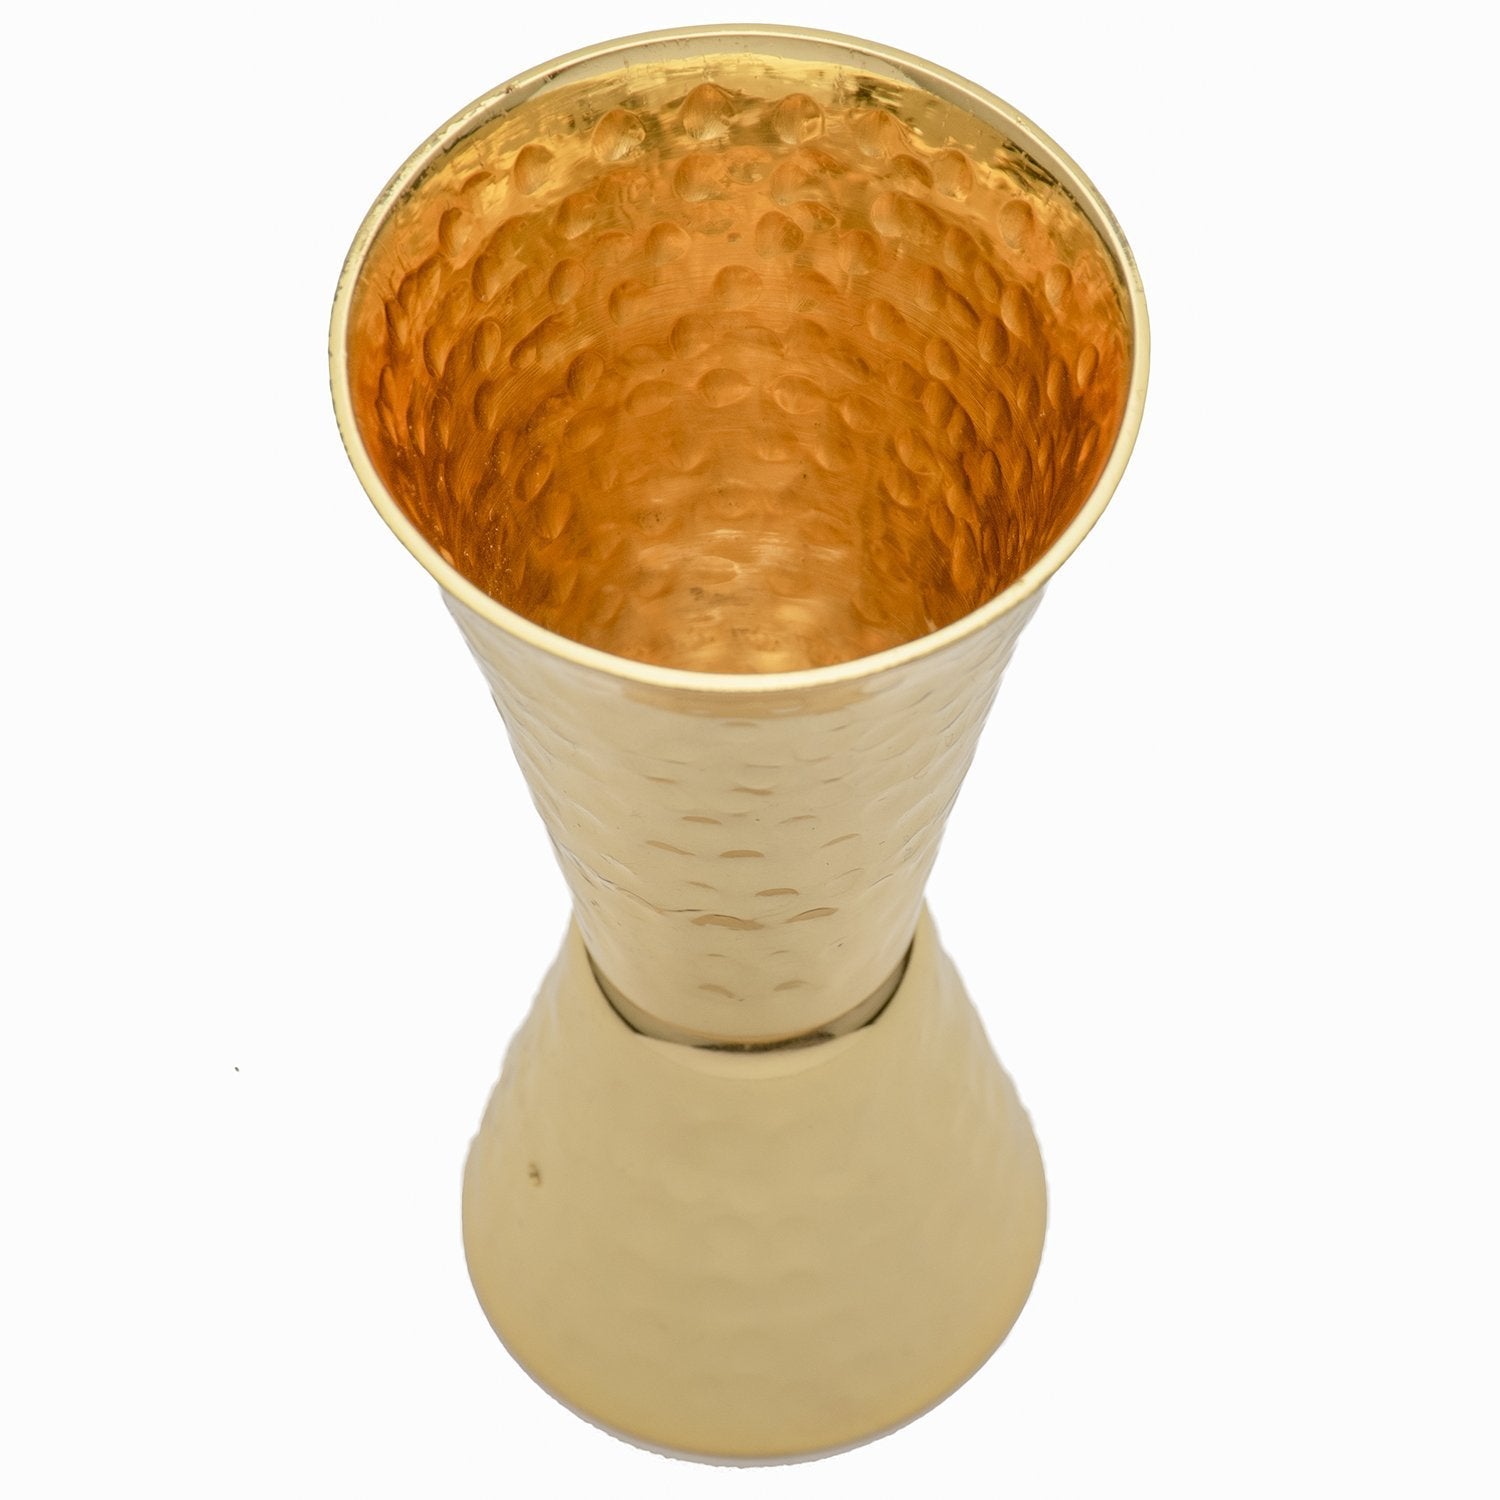 Prince of Scots 24K Gold Plate Hammered Solid Copper Jigger-Dining and Entertaining-POSJIG24K-810032751821-Prince of Scots-Prince of Scots